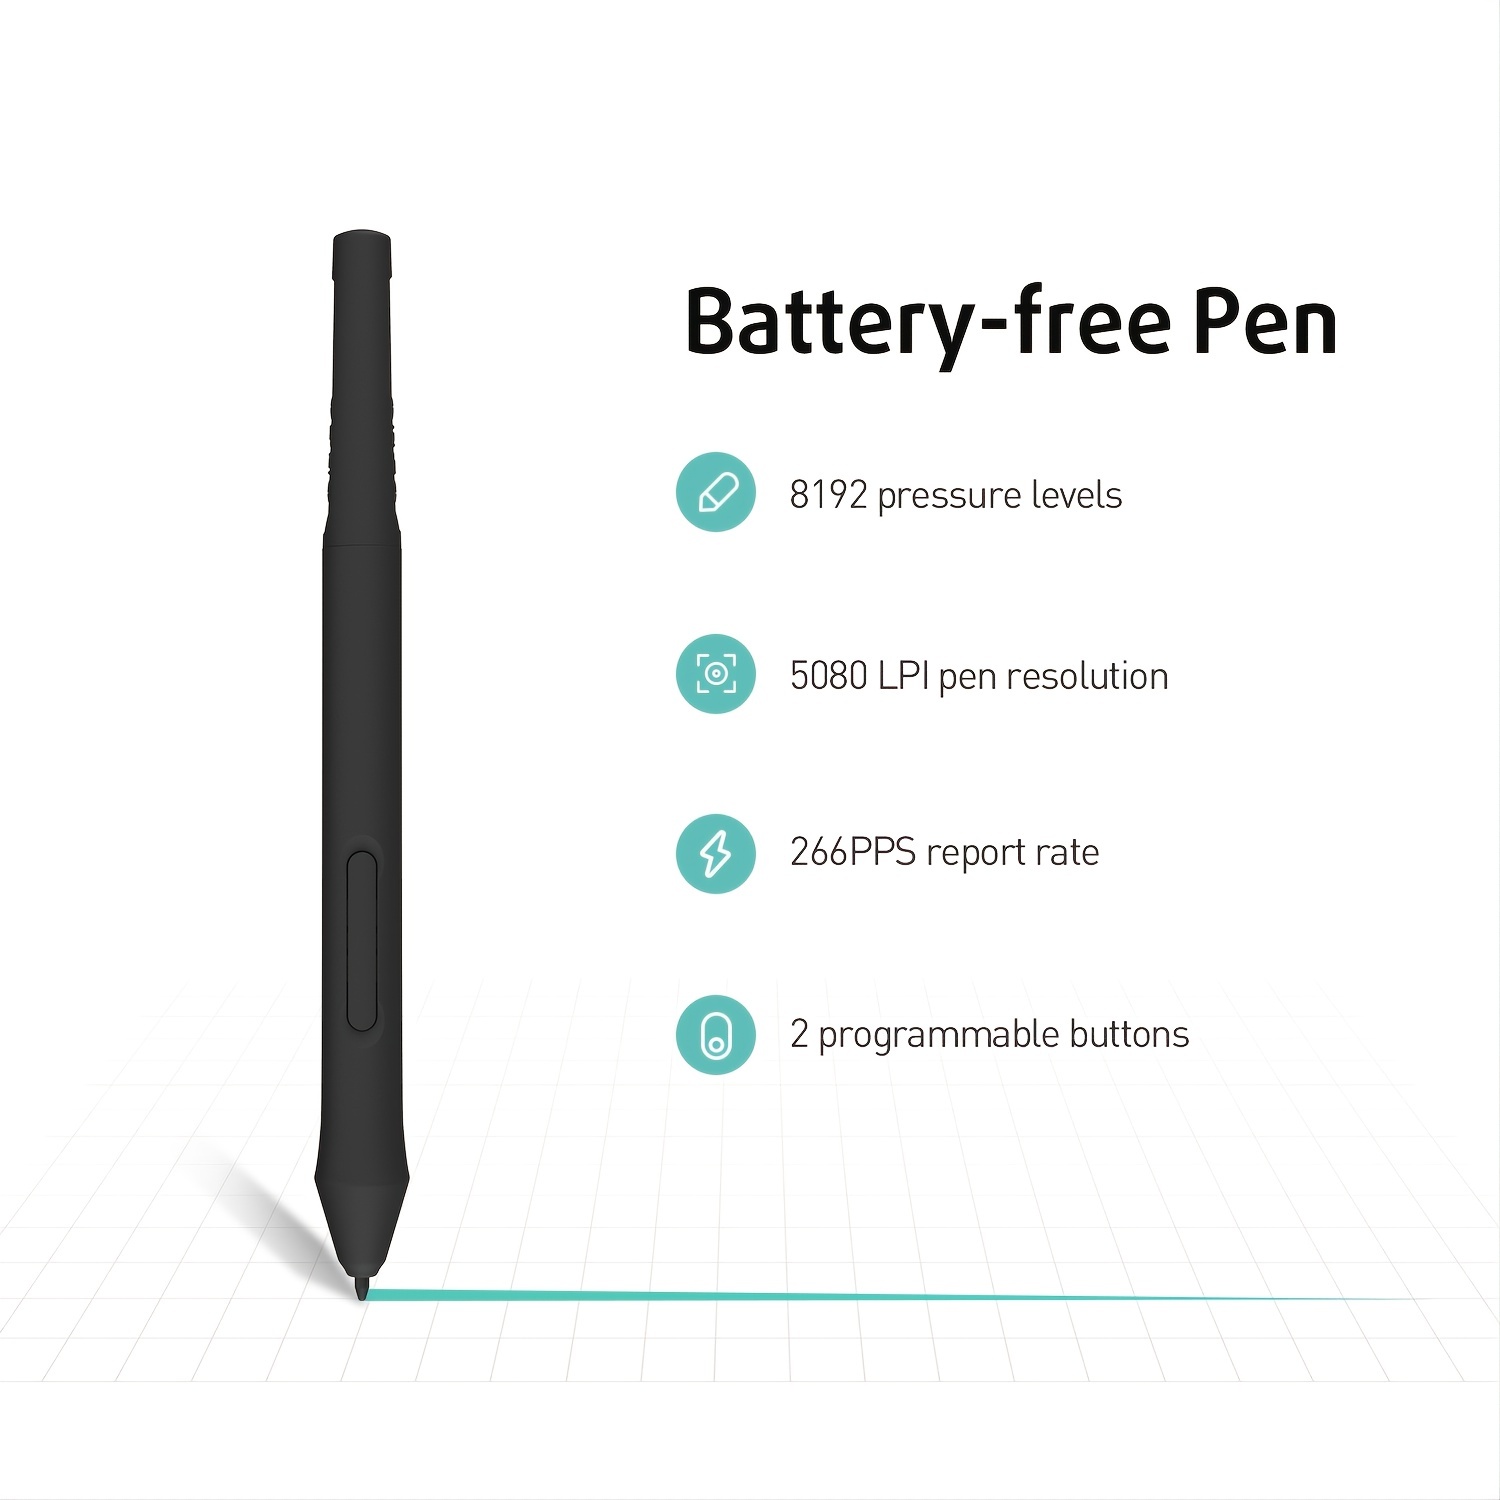 XP-PEN StarG640 Drawing Graphic Tablet Digital OSU Writing Pen Tablet with  8192 Levels Battery-Free Stylus for OSU Game/E-Learning/Online Class (800)